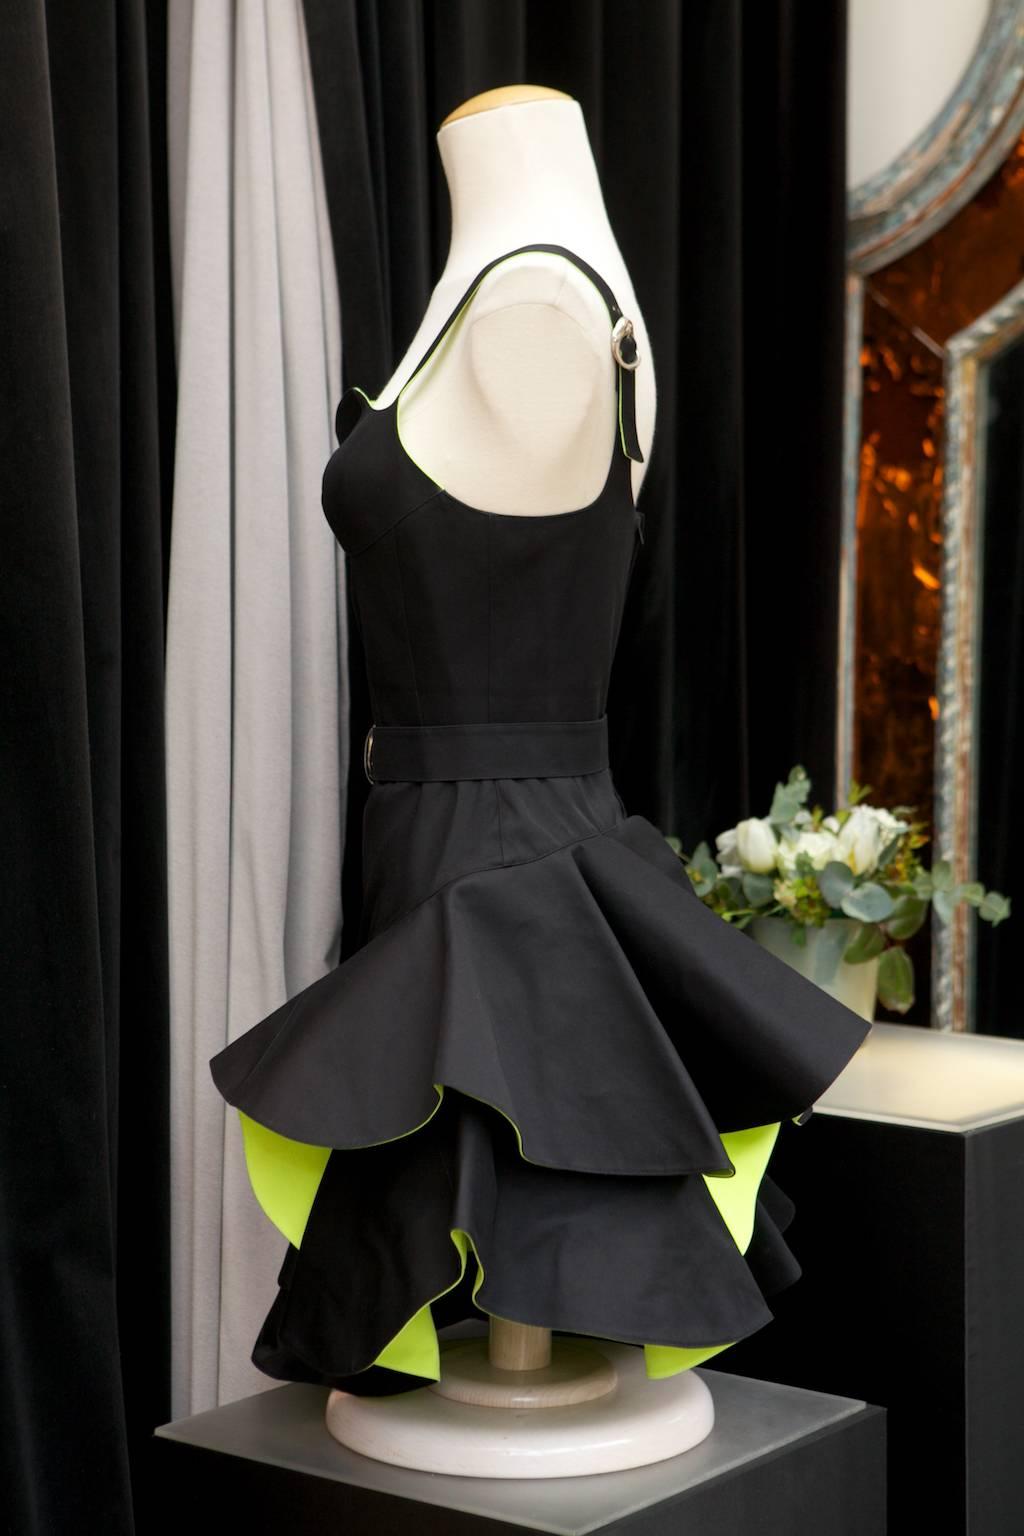 THIERRY MUGLER PARIS (Made in France) Short cocktail dress composed of cotton in black and apple green color, stylized with a black cotton belt fastening with a silver metal buckle. 
The same buckle is presented on the shoulder straps. 

The